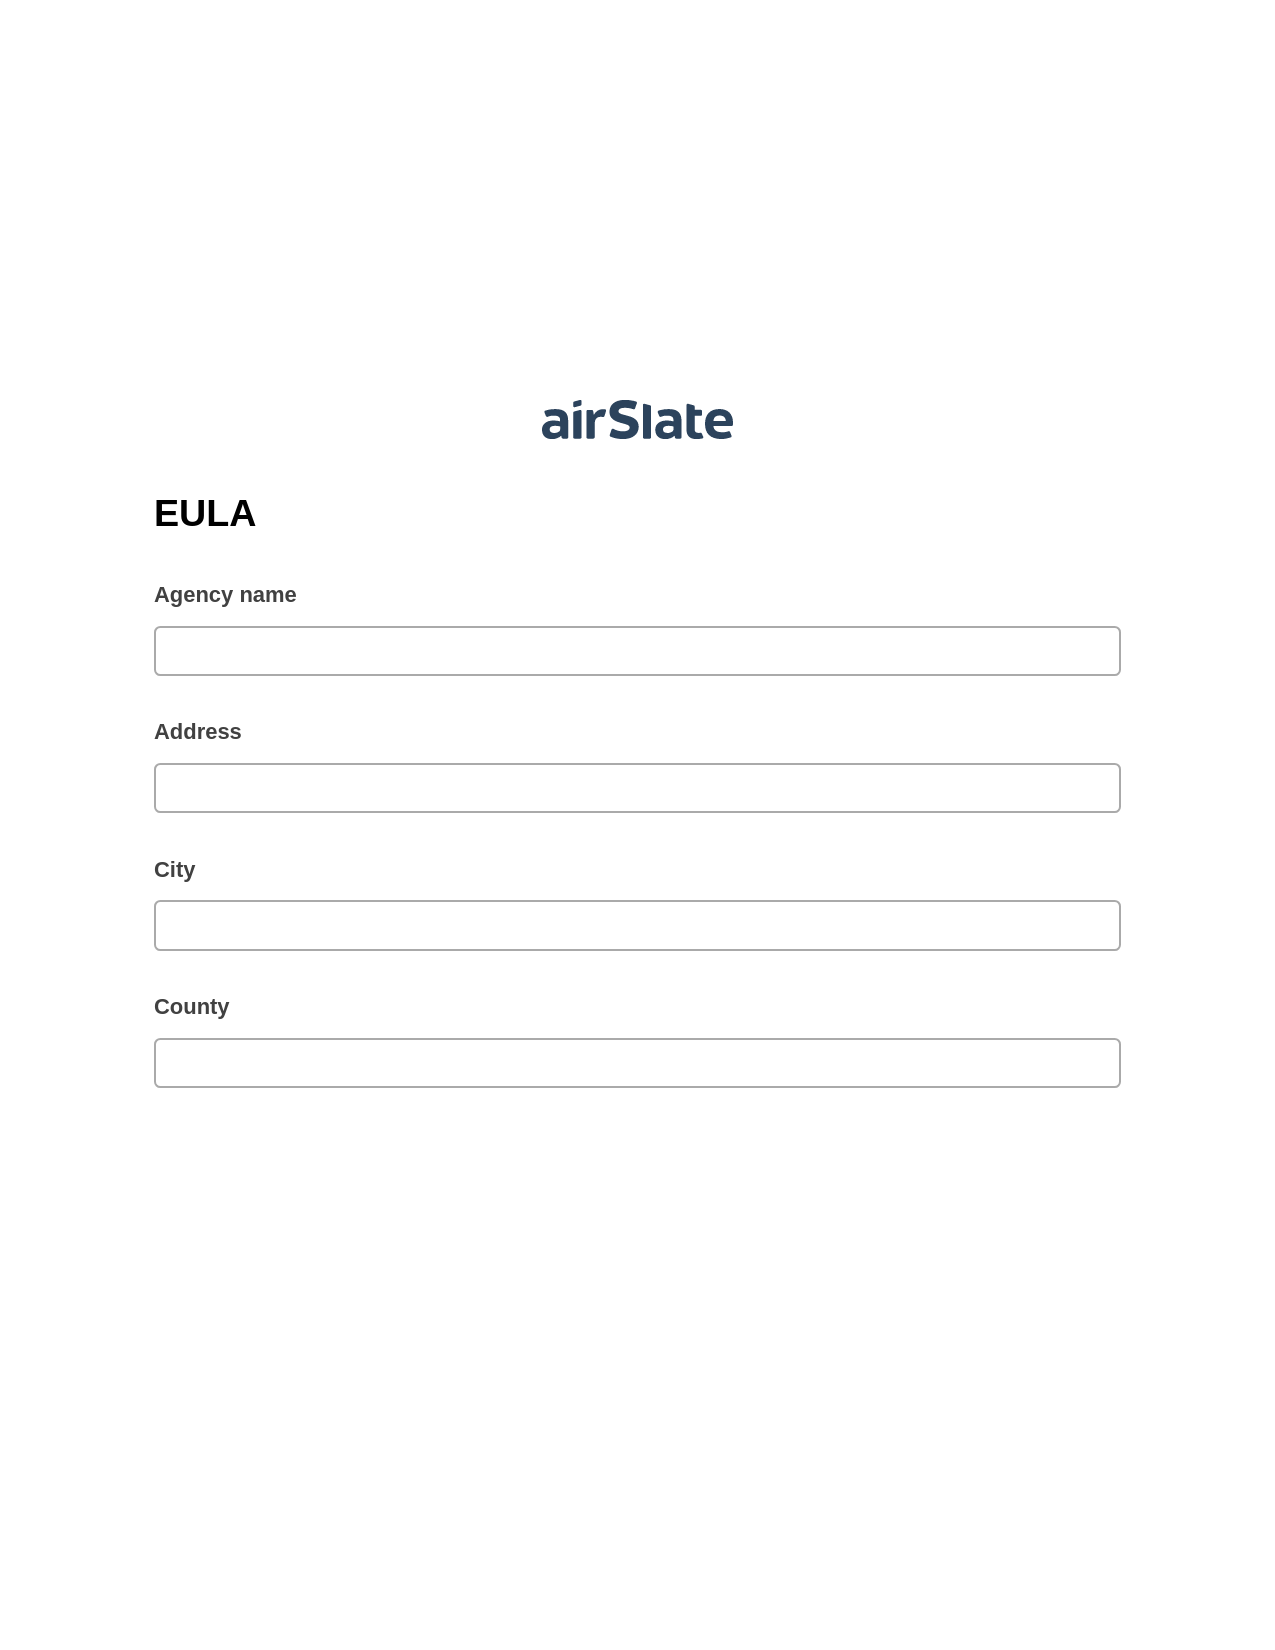 EULA Pre-fill from Excel Spreadsheet Dropdown Options Bot, Remove Tags From Slate Bot, Box Bot